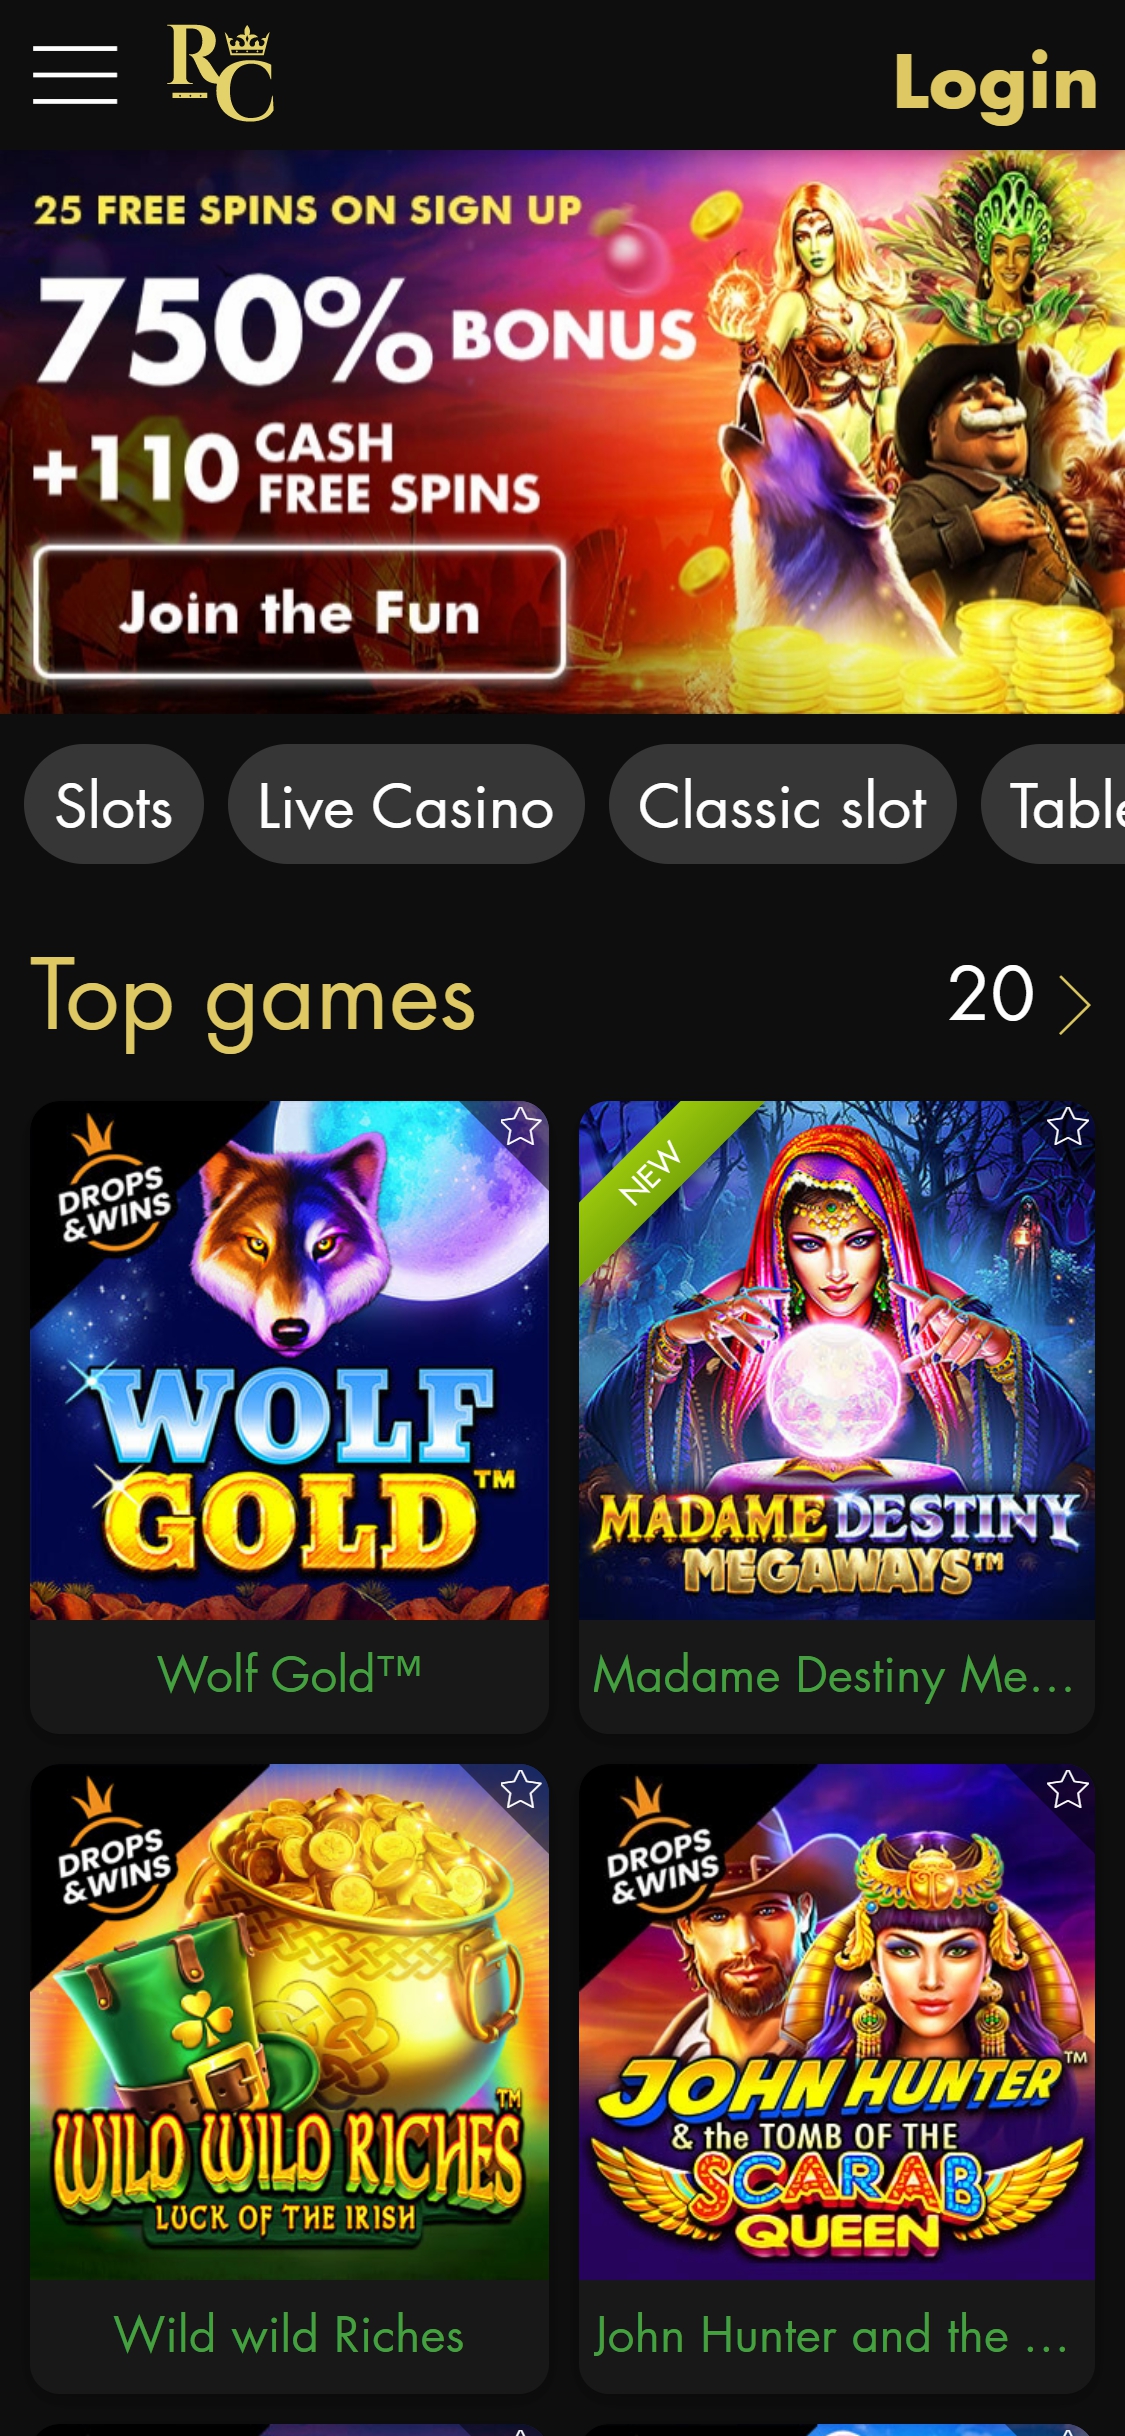 Rich Casino Mobile Review